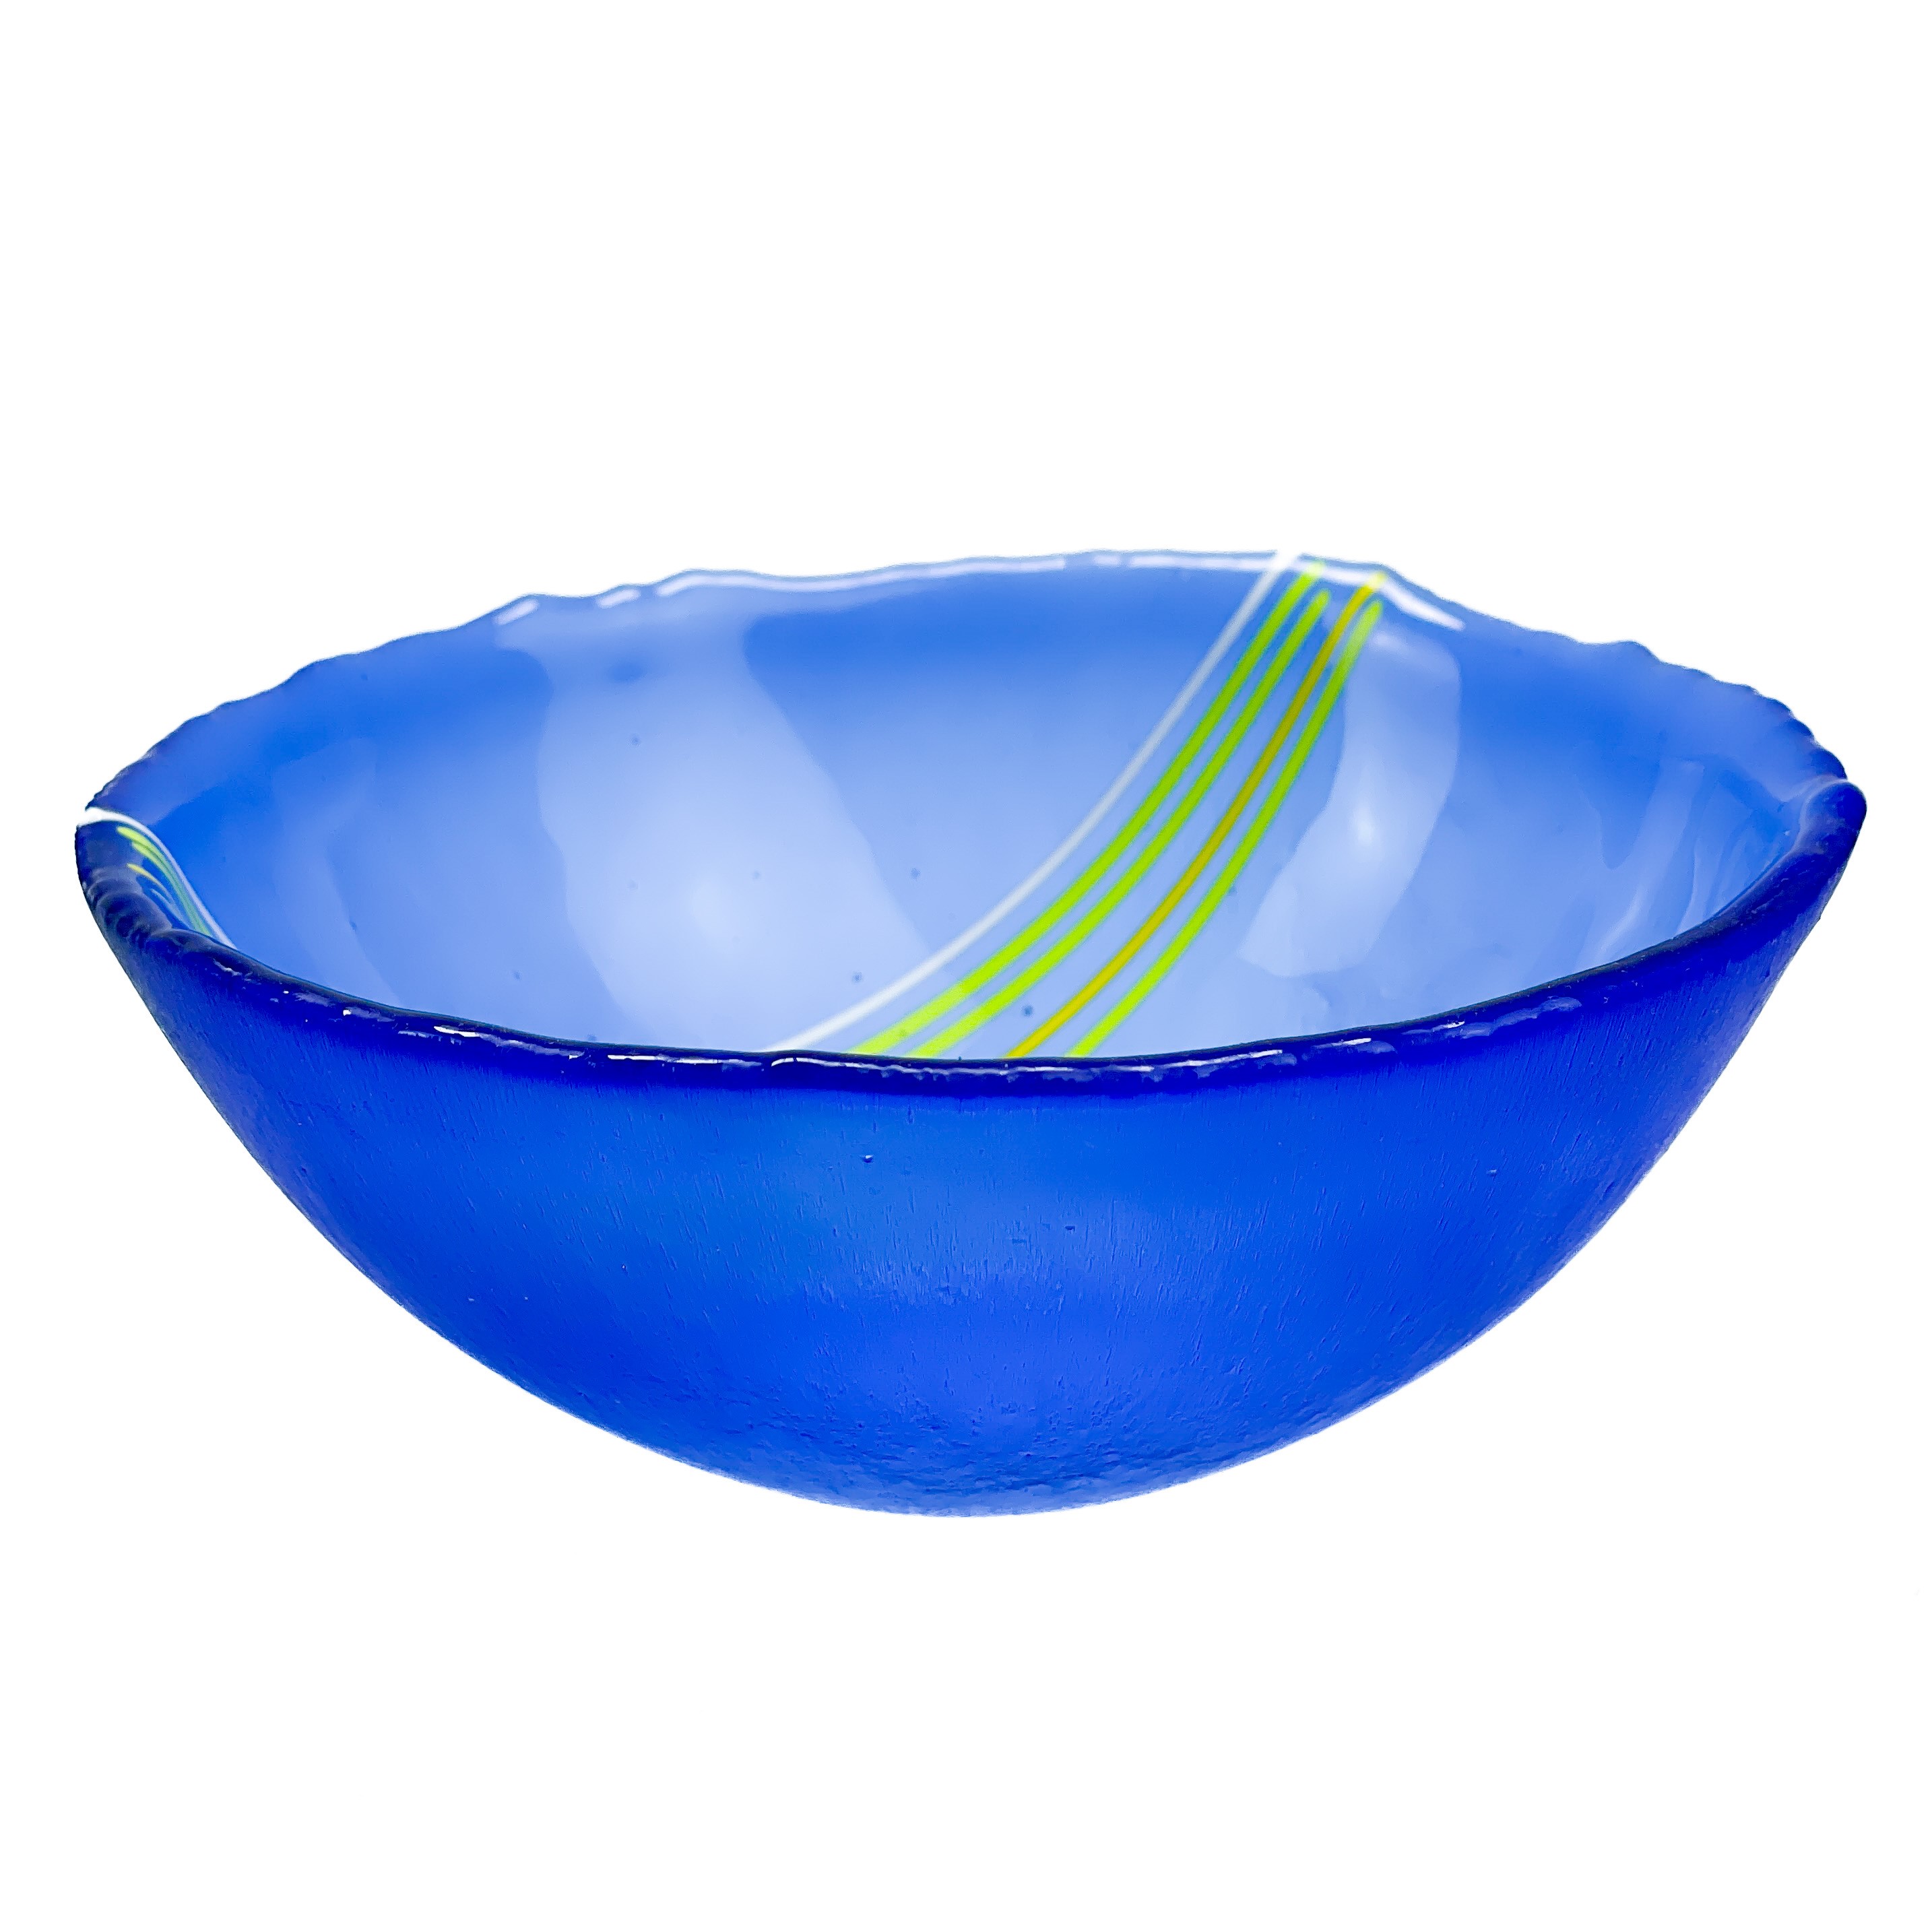 Serena RADCLIFFE Eight Glass Art Bowls - Image 4 of 18